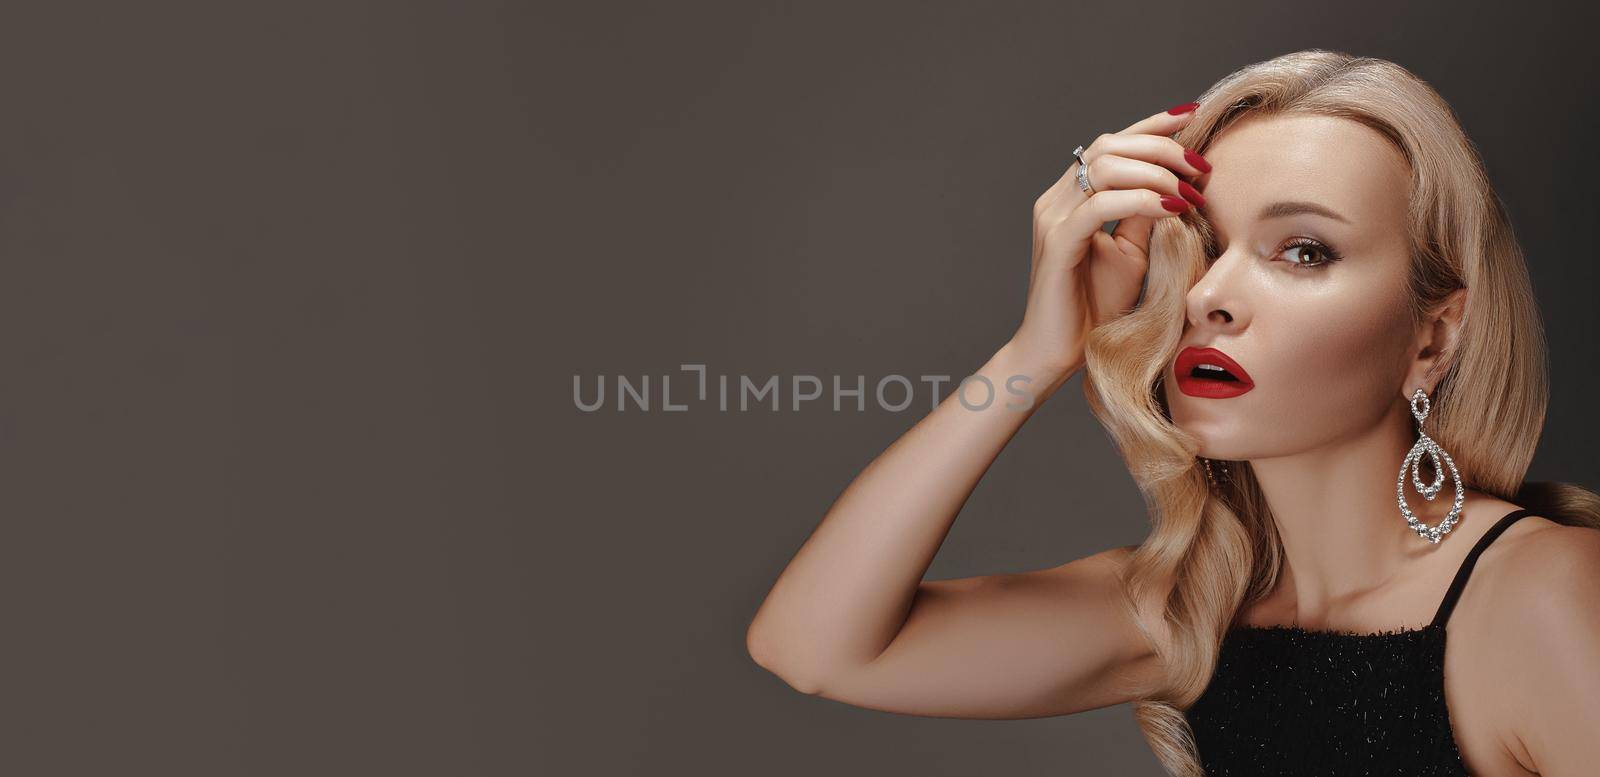 Beautiful Woman with Fashion Make-up and Blond Wave Hairstyle. Glamour American Diva Style with Brilliant Accessories by MarinaFrost